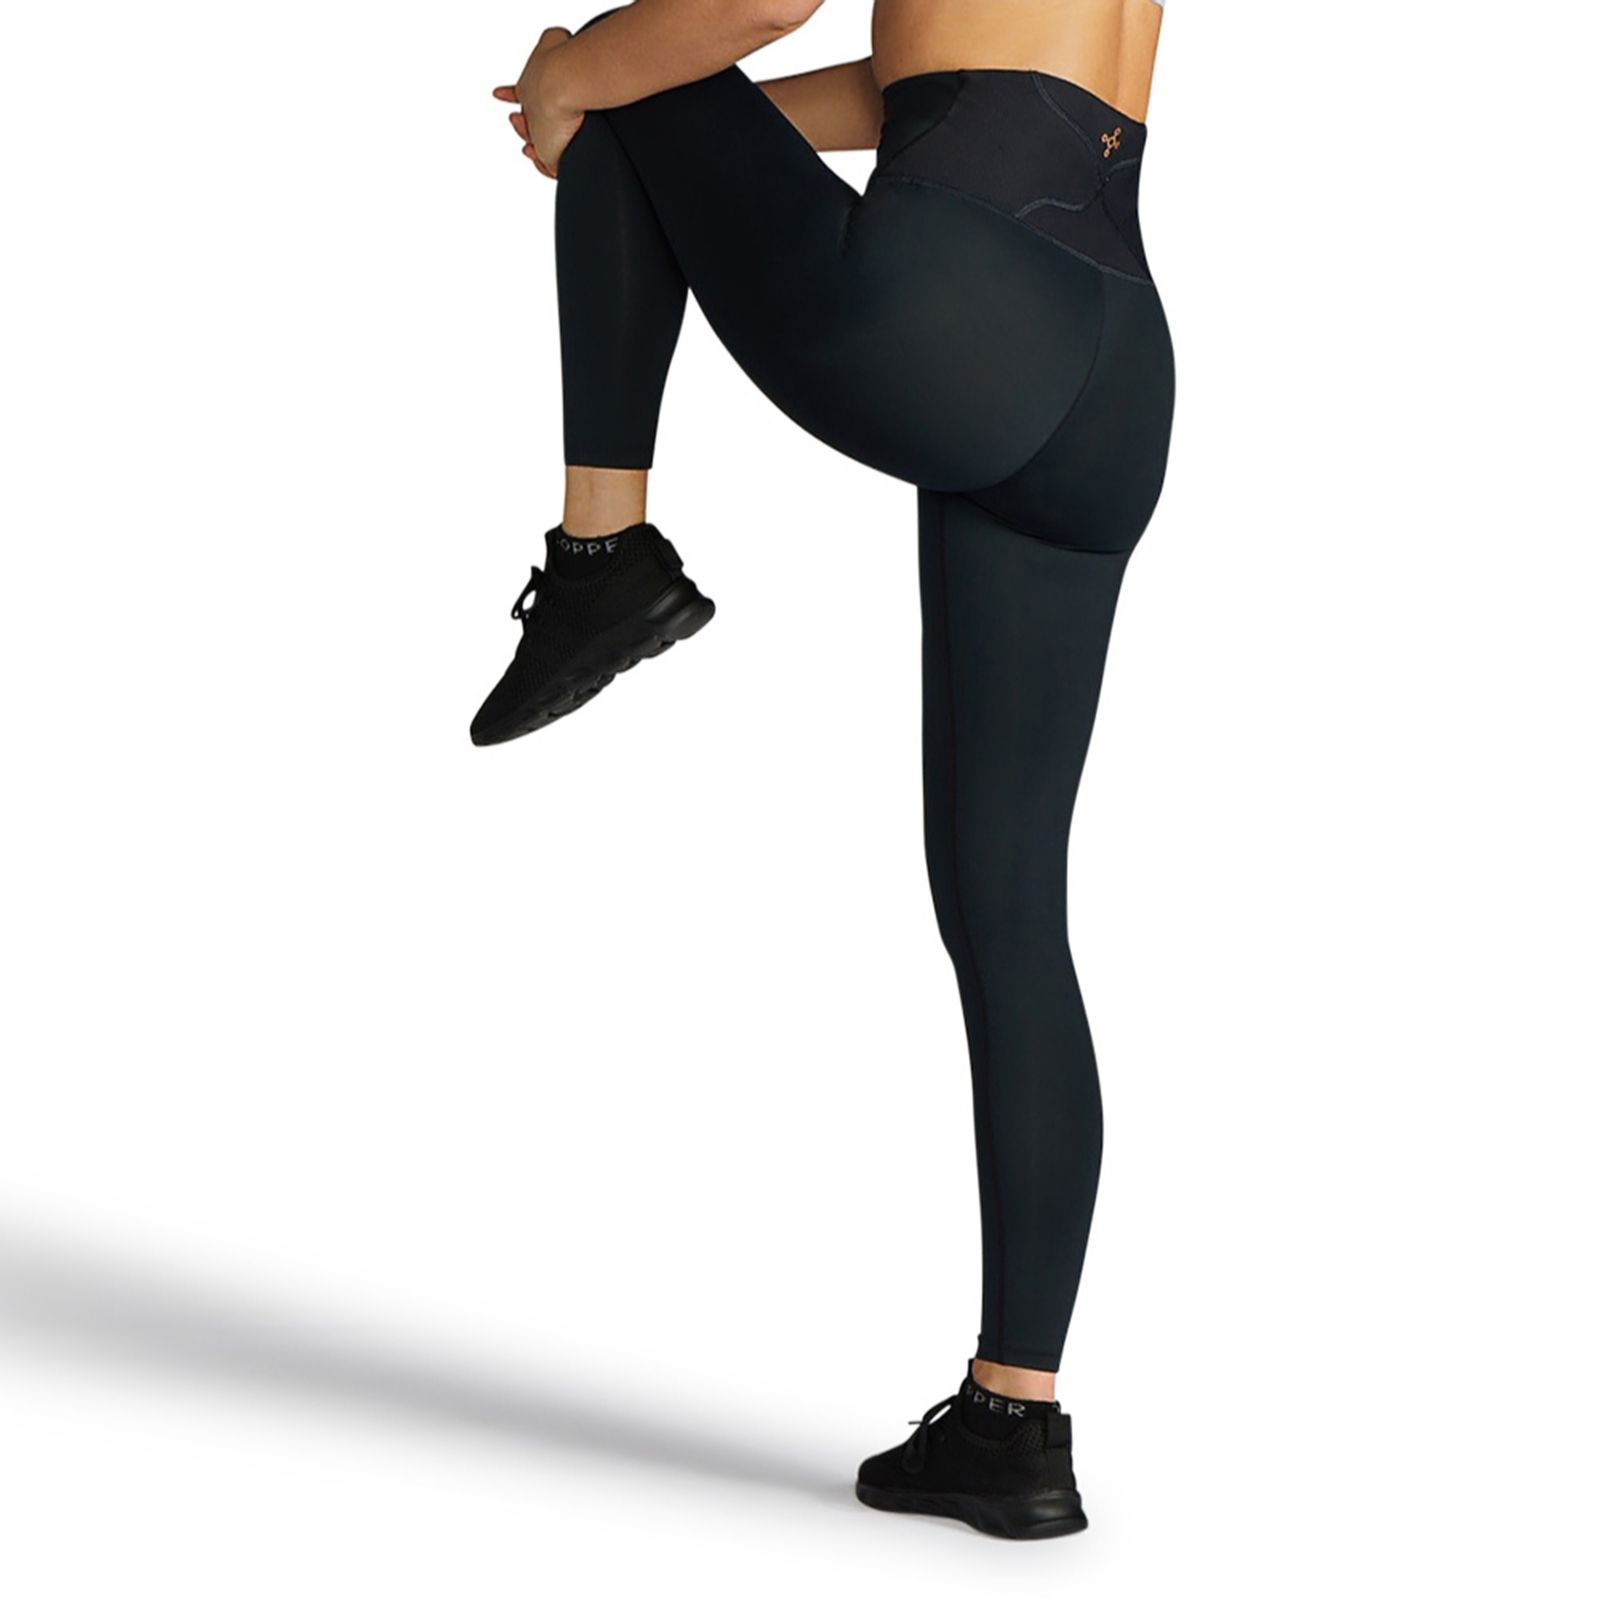 Tommie Copper Lower Back Support Compression Leggings - QVC UK